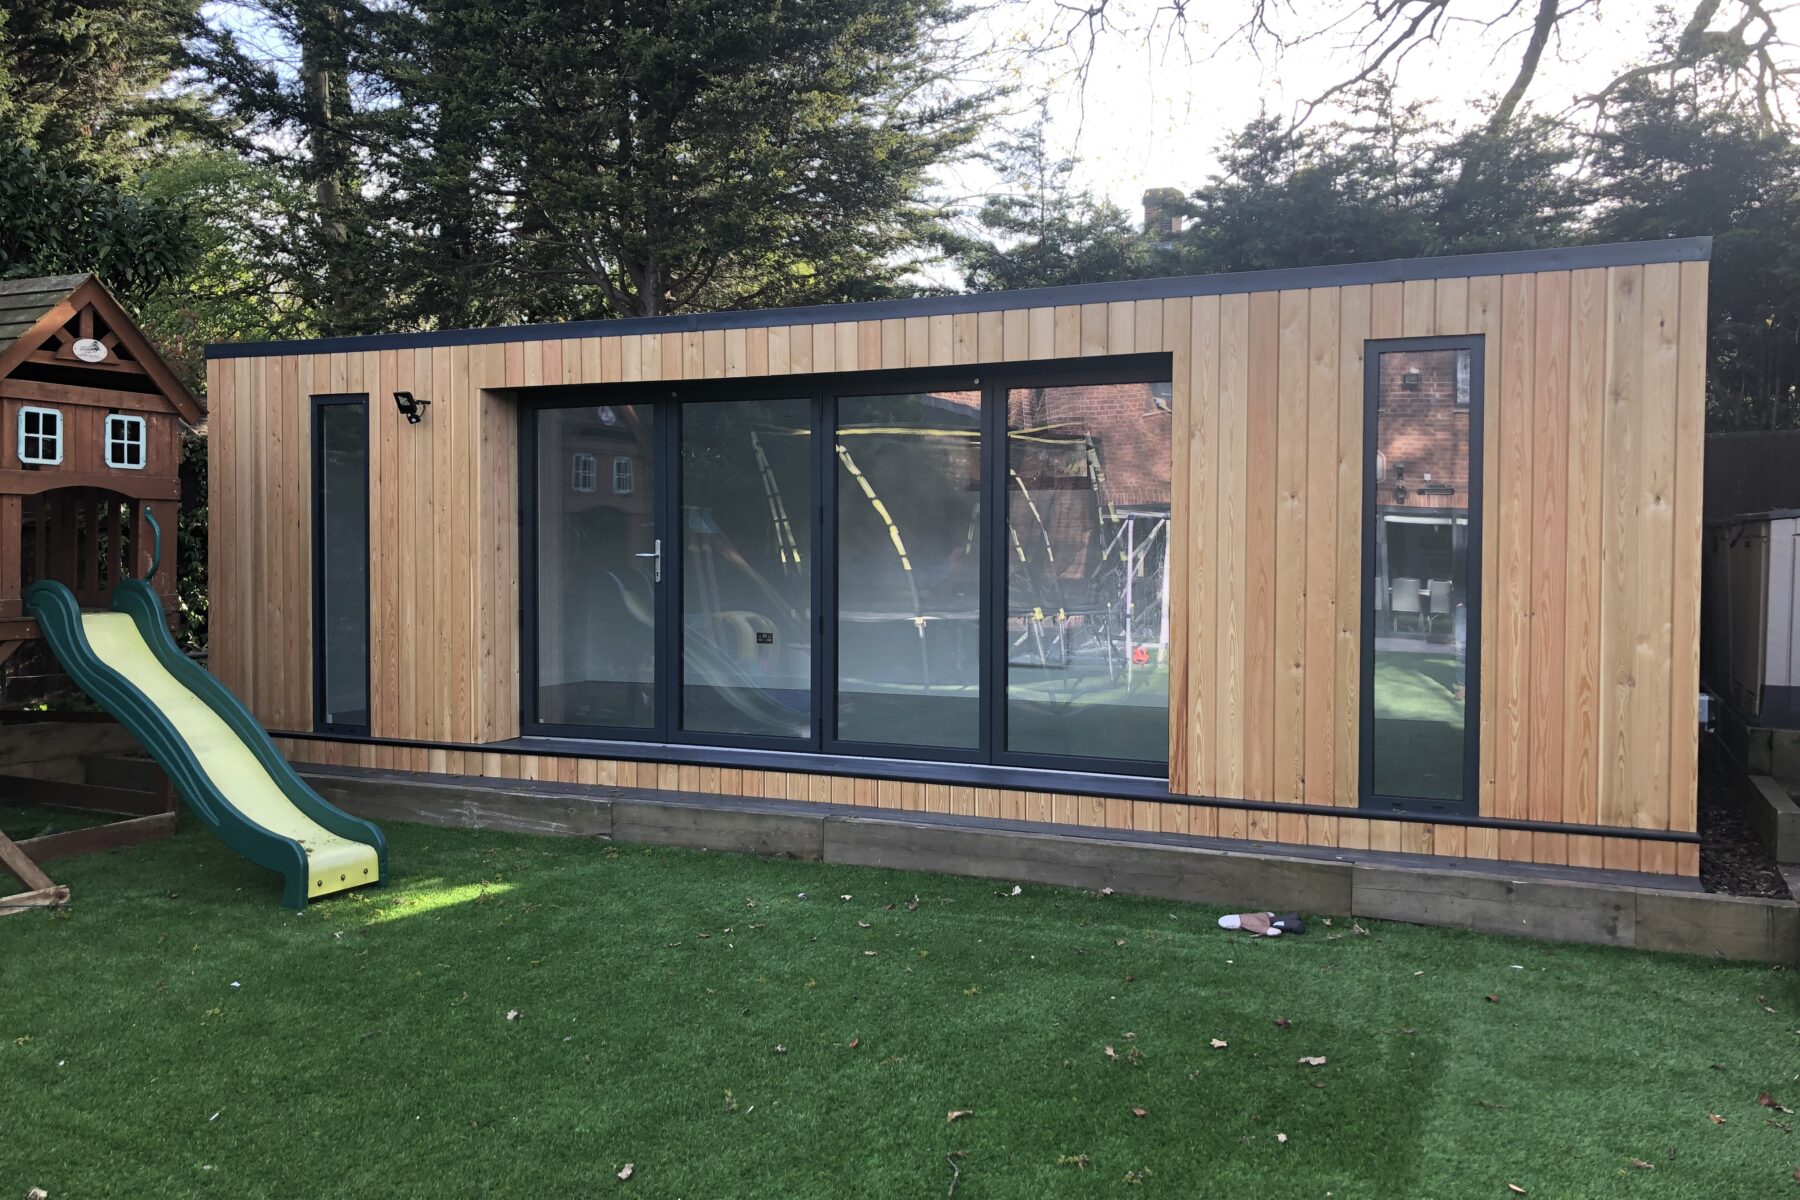 Exterior view of a larch clad Vivid Green flat-roofed family garden room with anthracite grey windows and aluminium bi-fold doors opening to artificial grass, featuring a playhouse and slide to the left and a trampoline reflected in the windows.